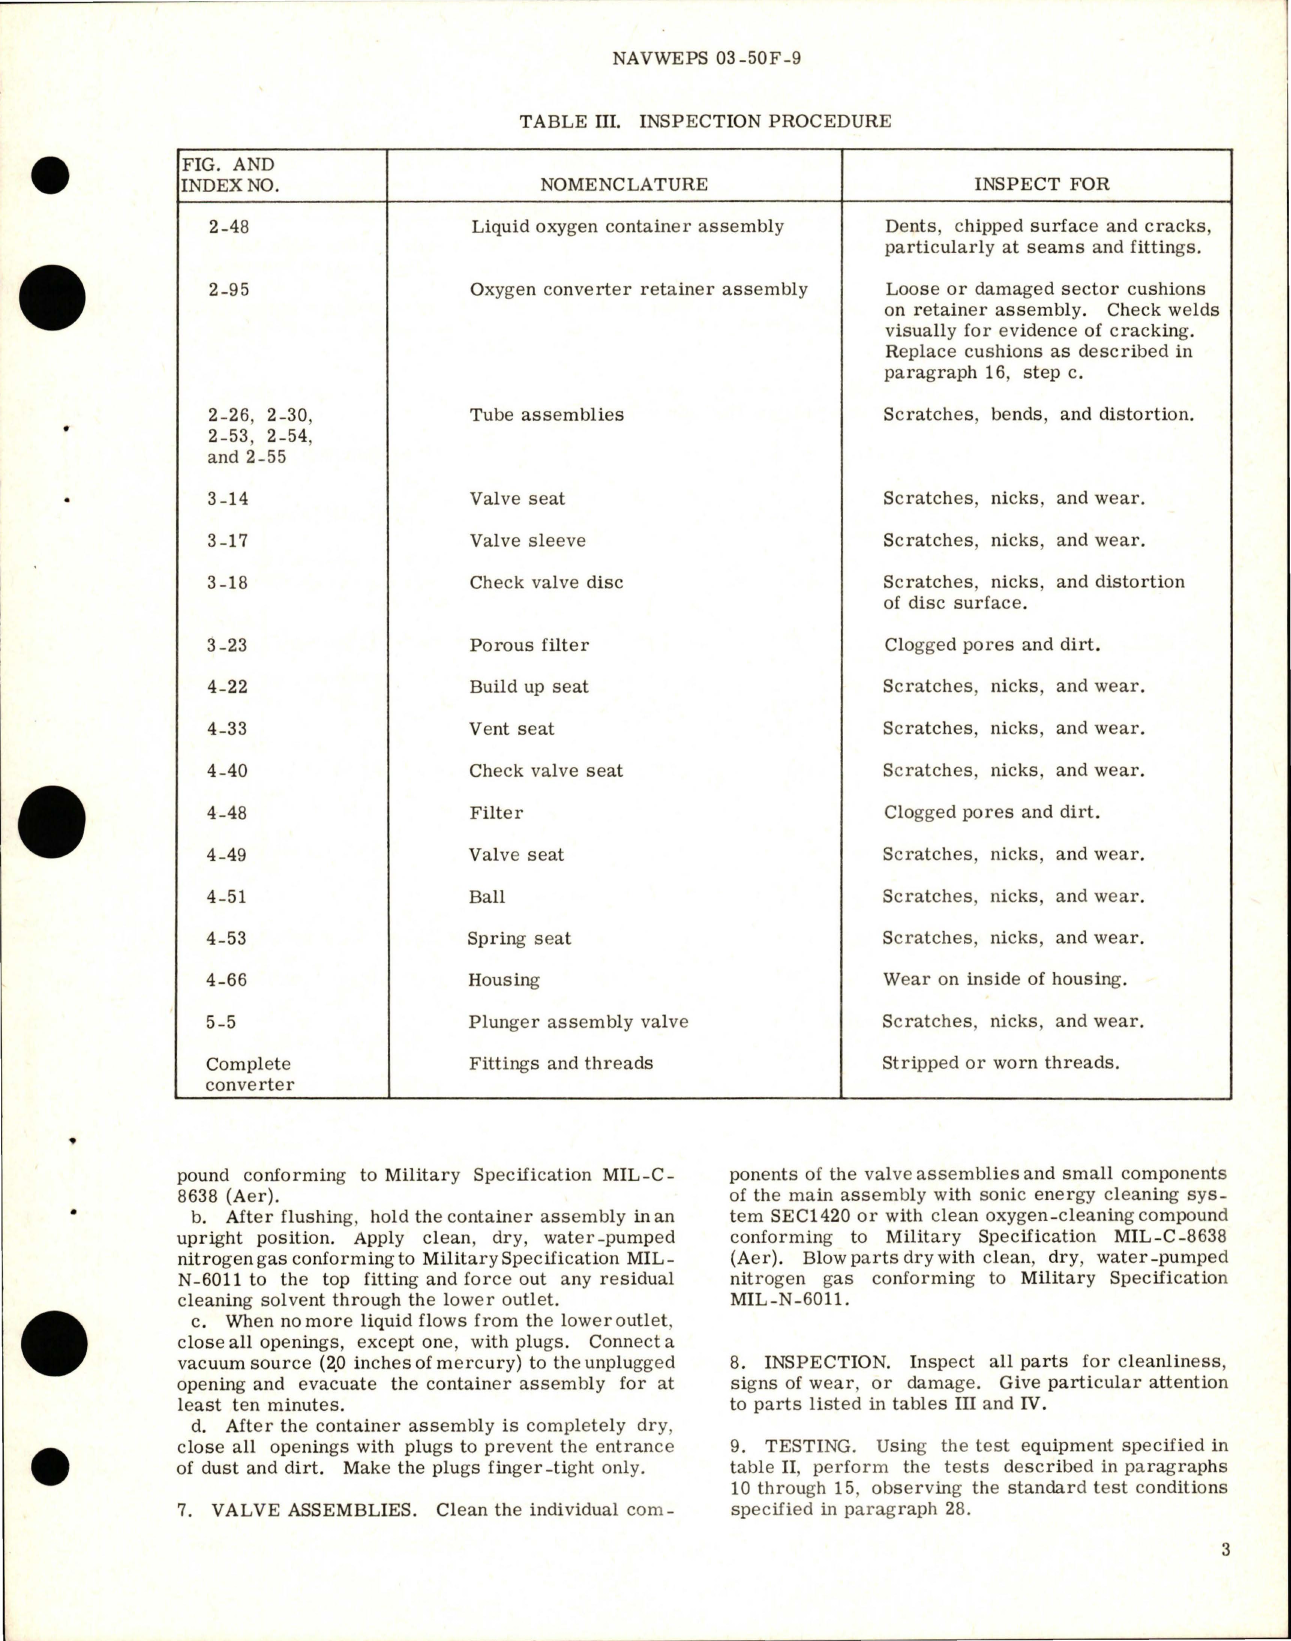 Sample page 5 from AirCorps Library document: Overhaul Instructions with Parts Breakdown for Liquid Oxygen Converter - Parts 29044-1-A1 and 29044-1-A1A 